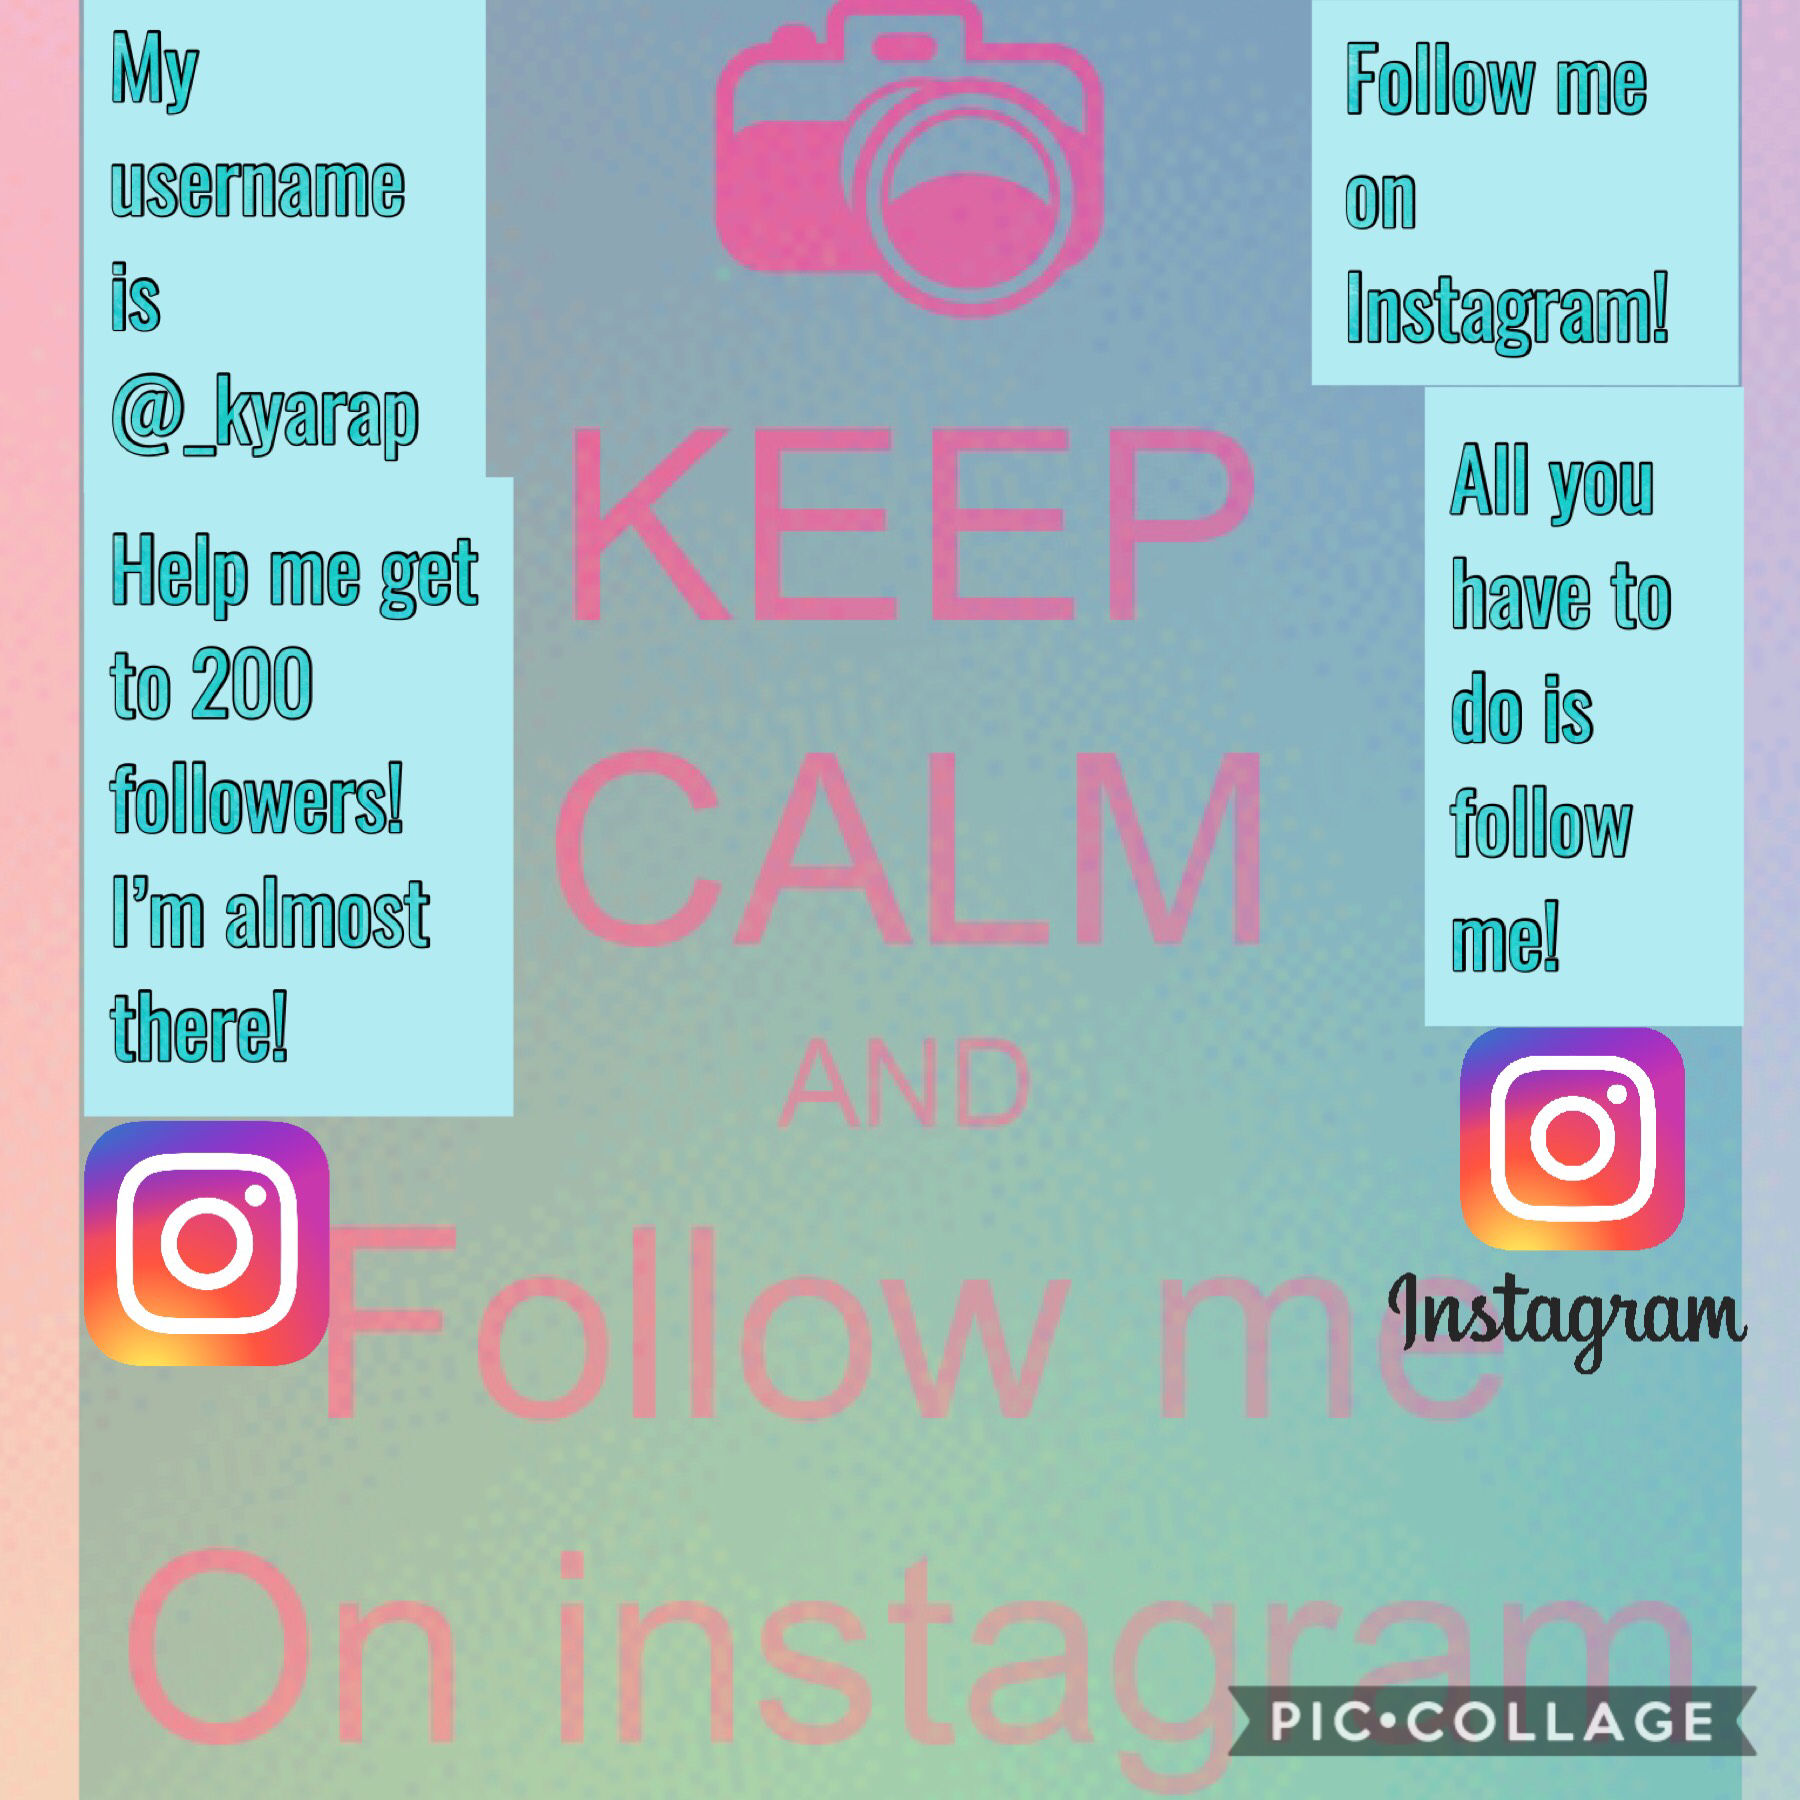 Hey guys! Help me get to 200 followers on Instagram! All you have to do is follow me, and that’s it! Comment on this pic a smiley face 😀 emoji so then I know you’ve done it! Thanks guys!, Kyara♥️